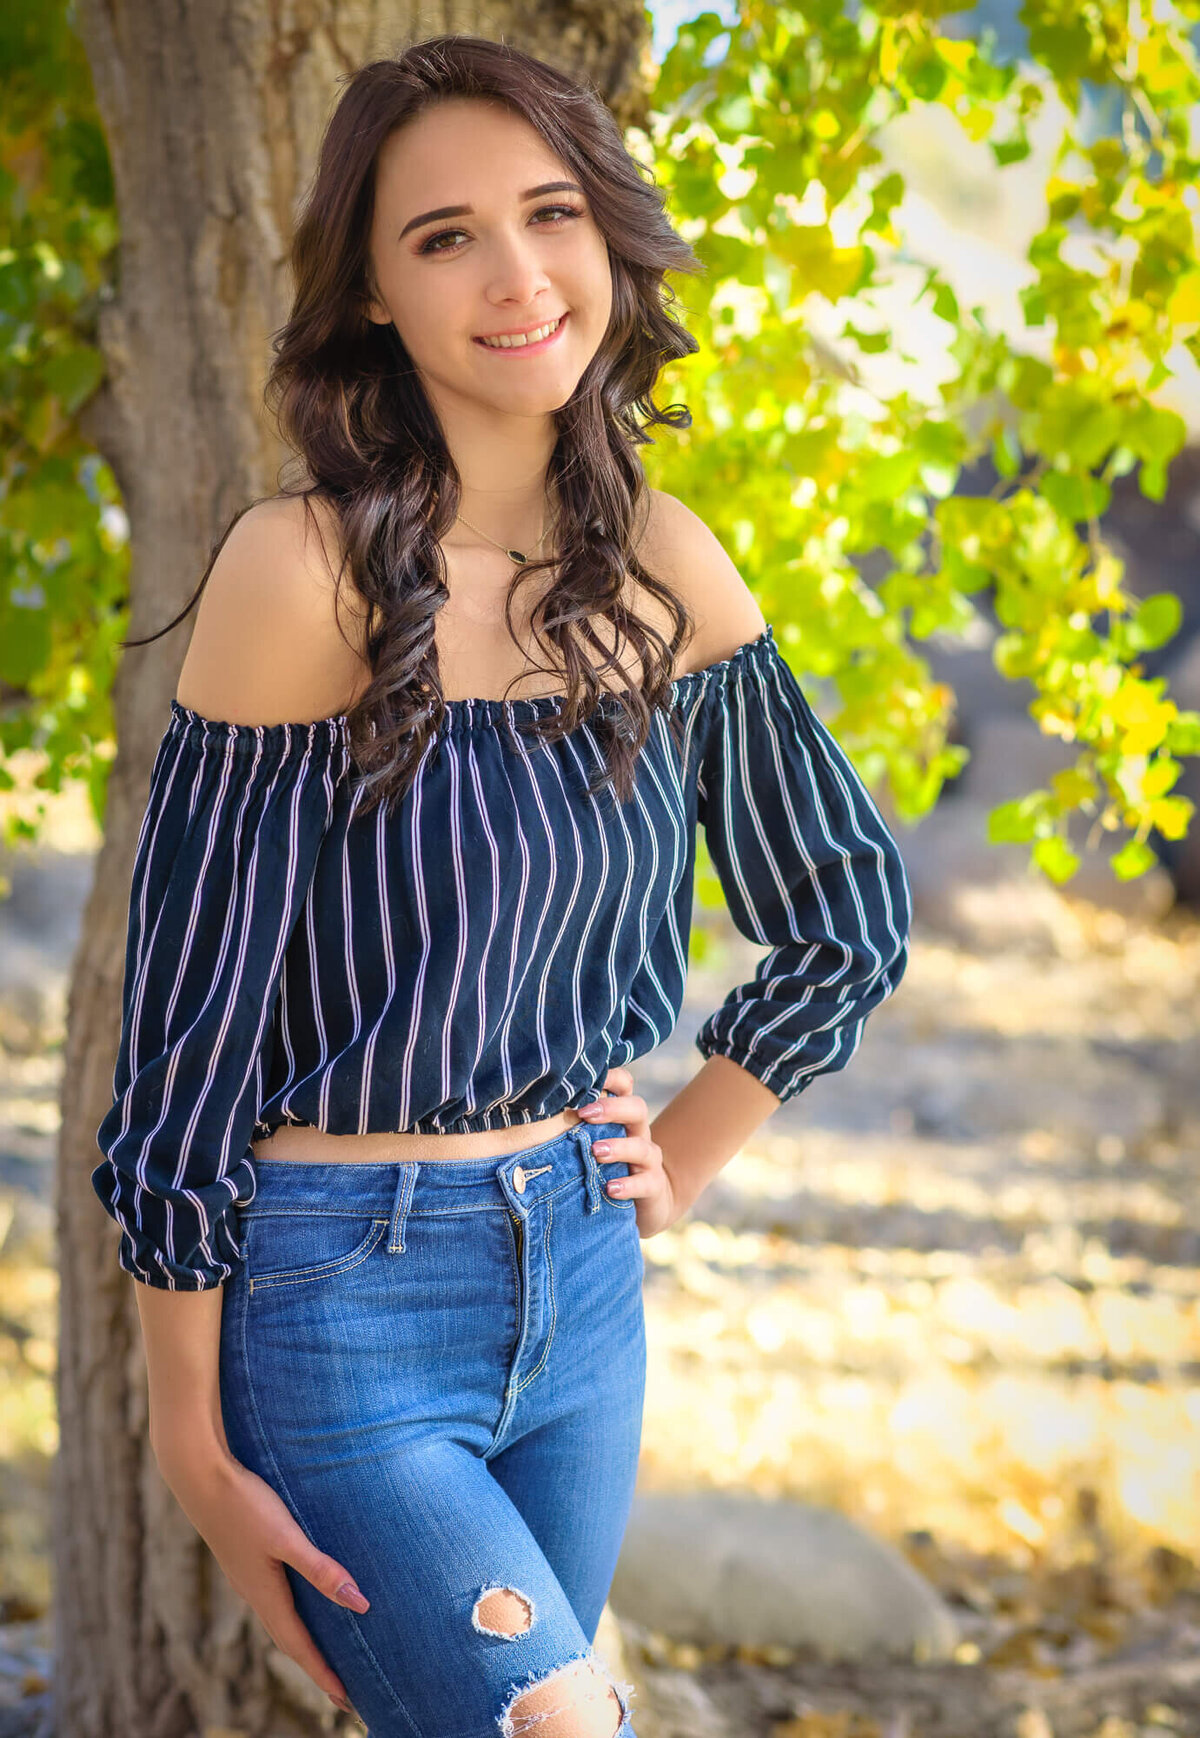 Prescott senior photography session outdoors with Melissa Byrne